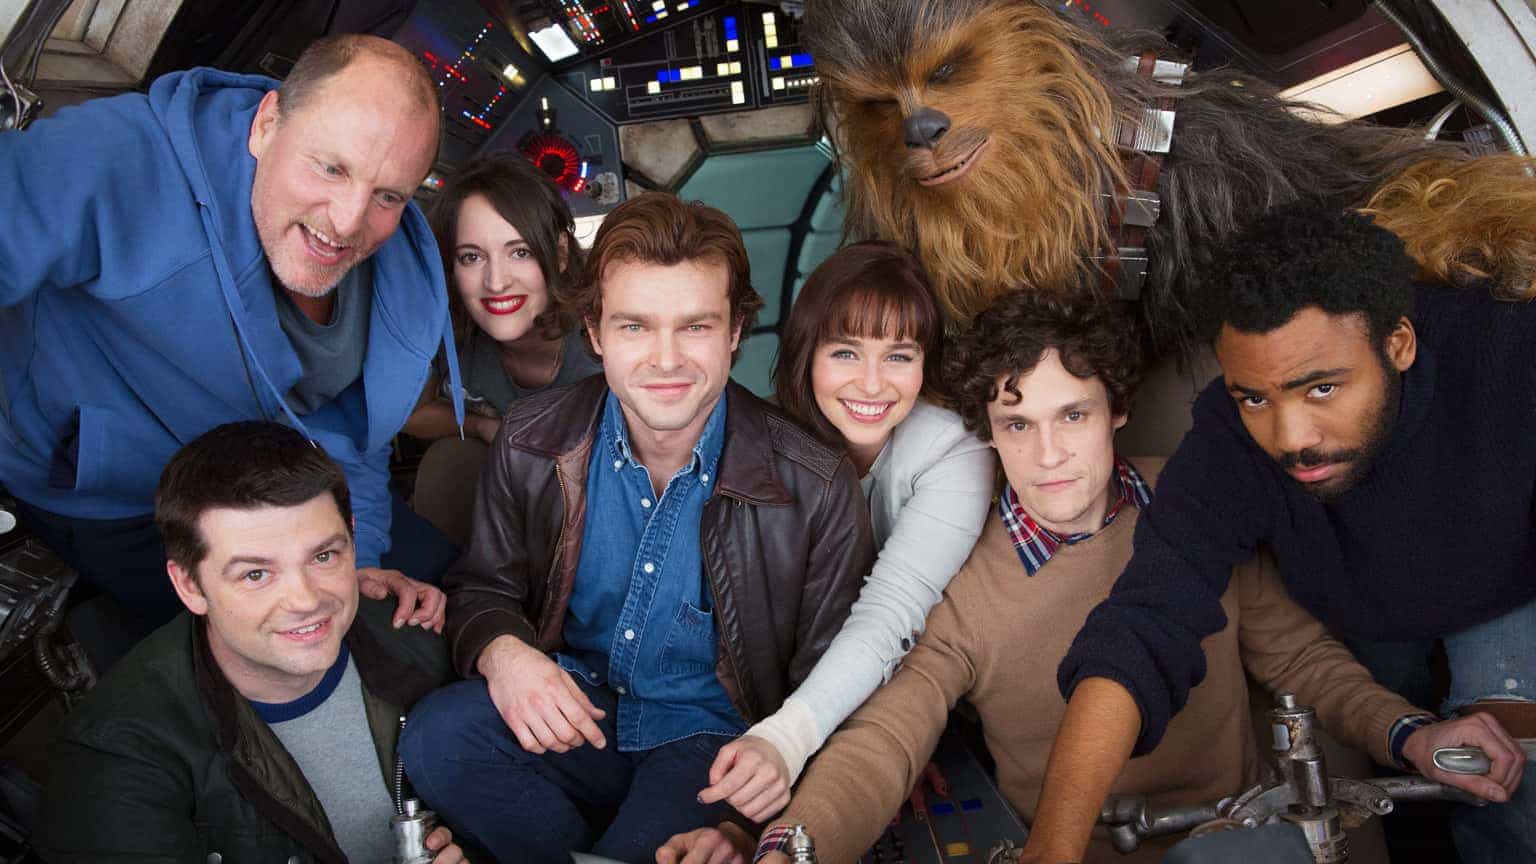 Han Solo cast post for a photo in the cockpit of the Millennium Falcon